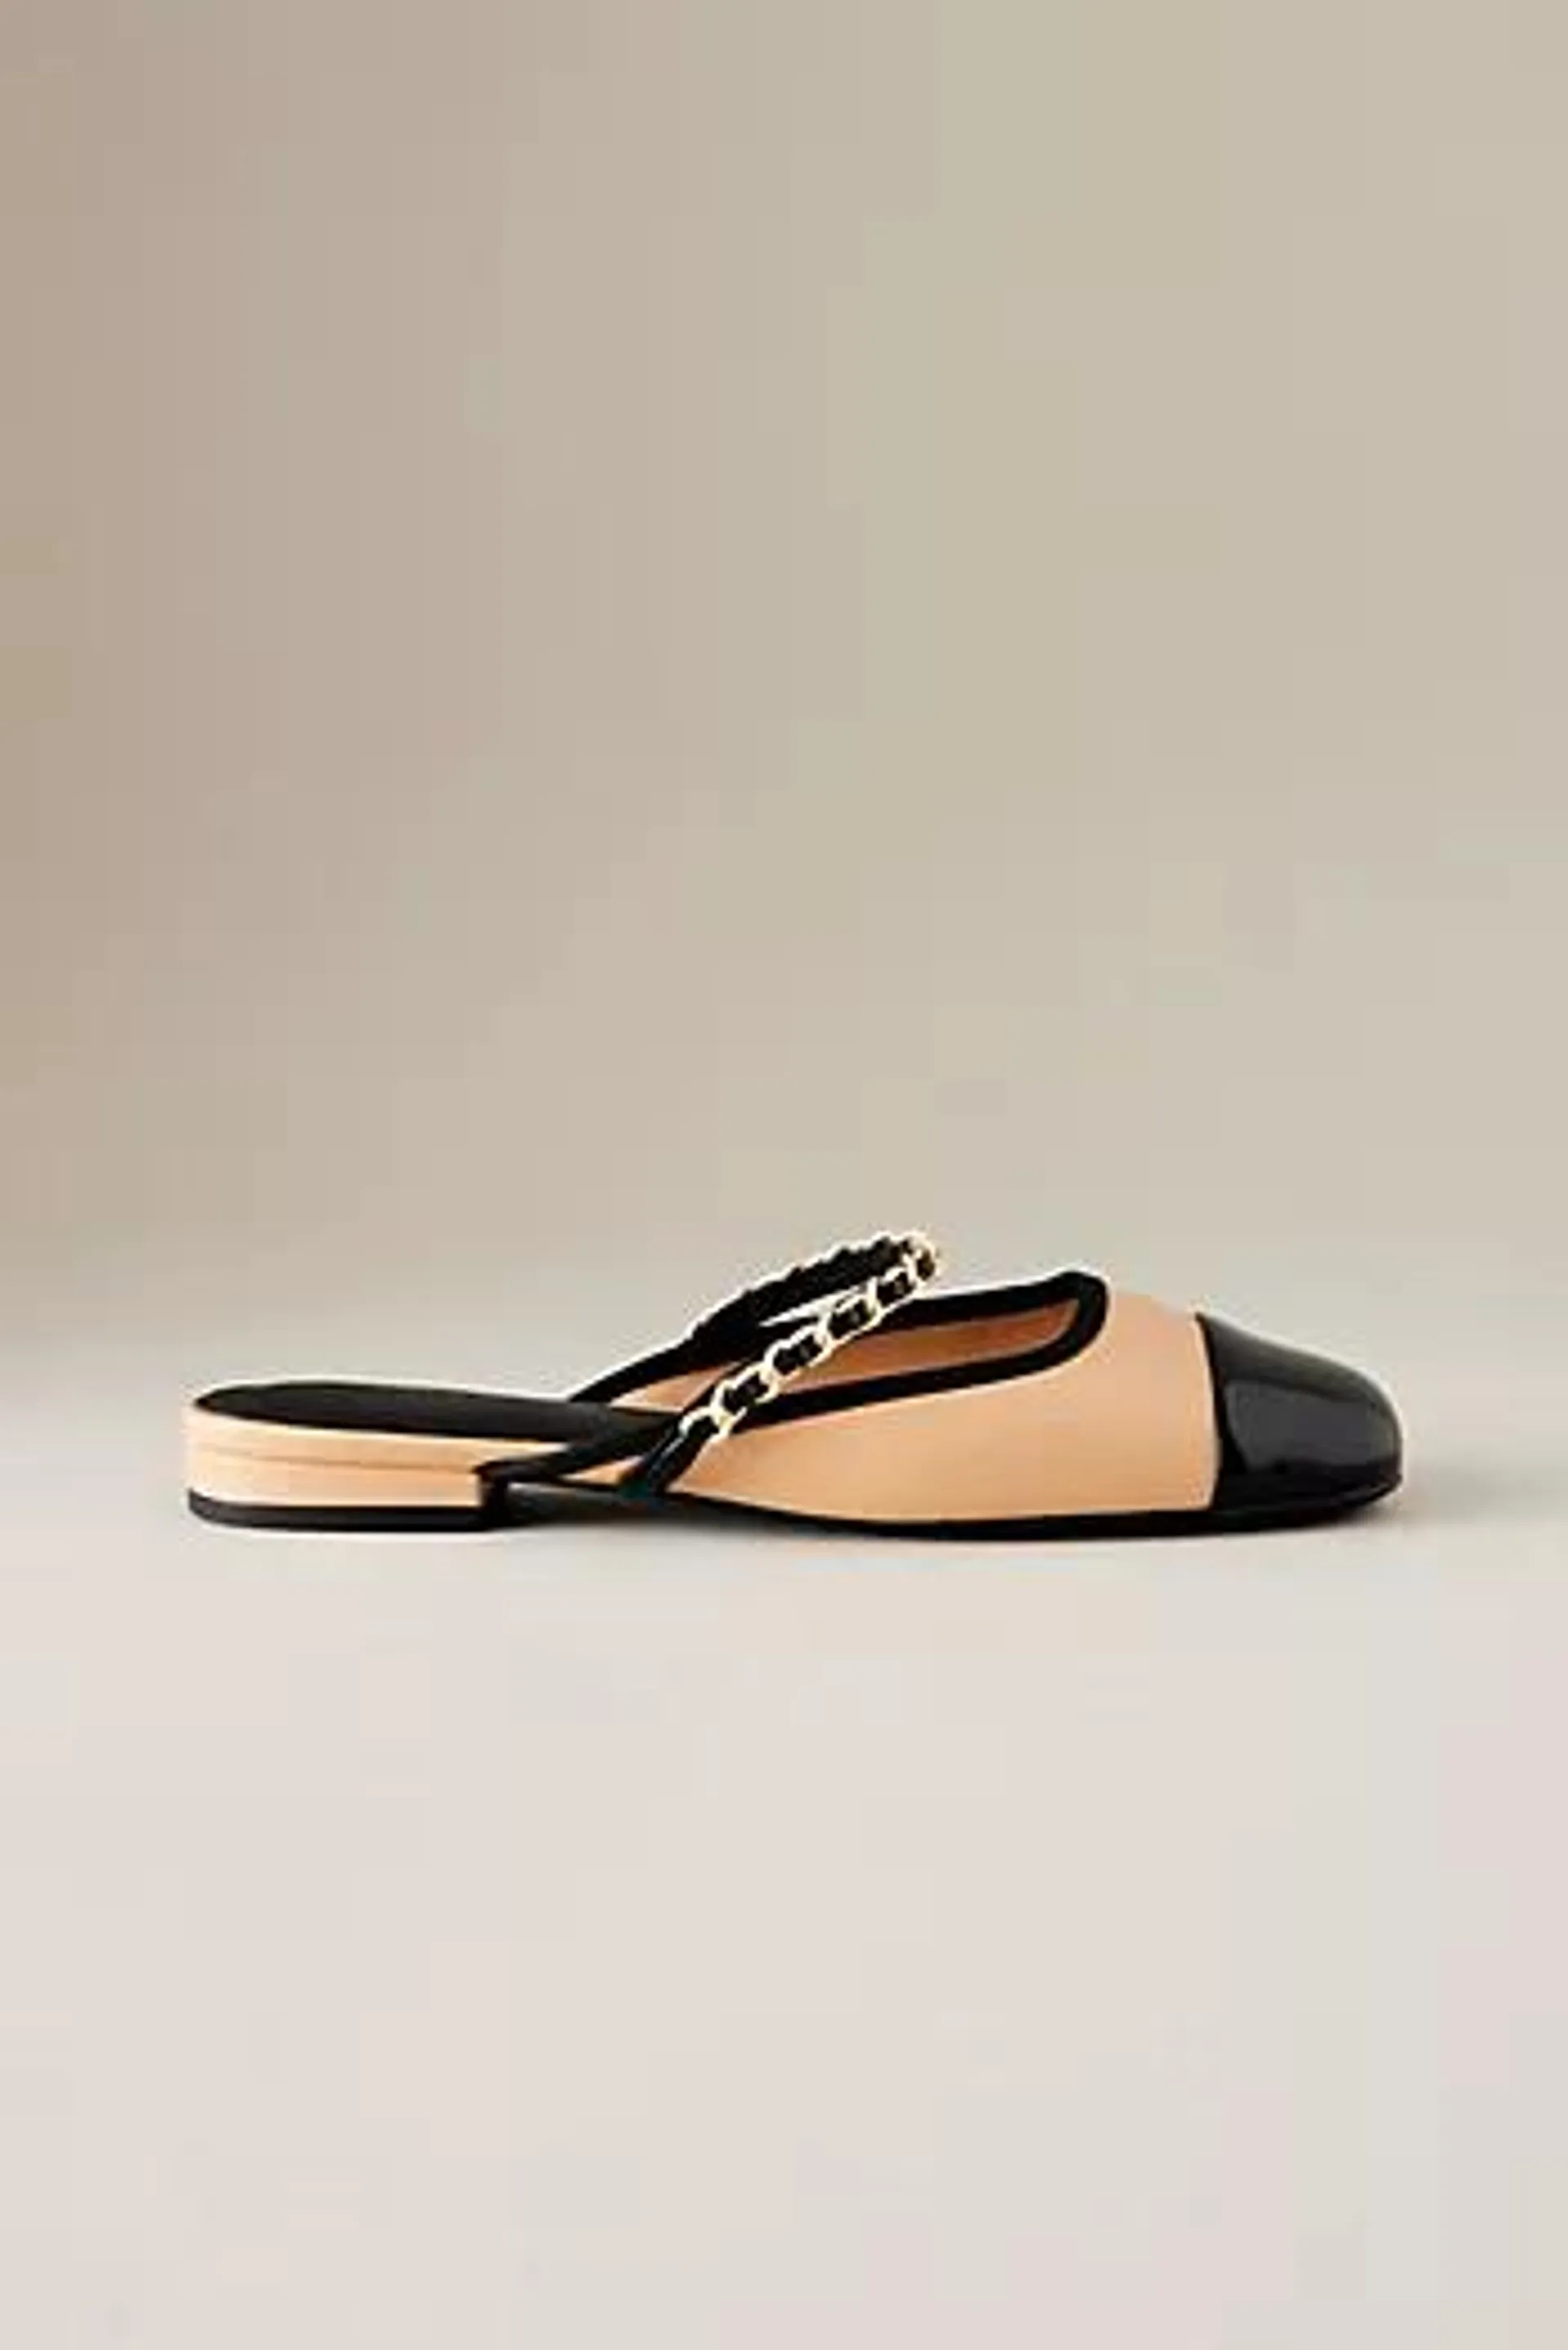 Charles & Keith Slingback Patent Faux Leather Flat Mules